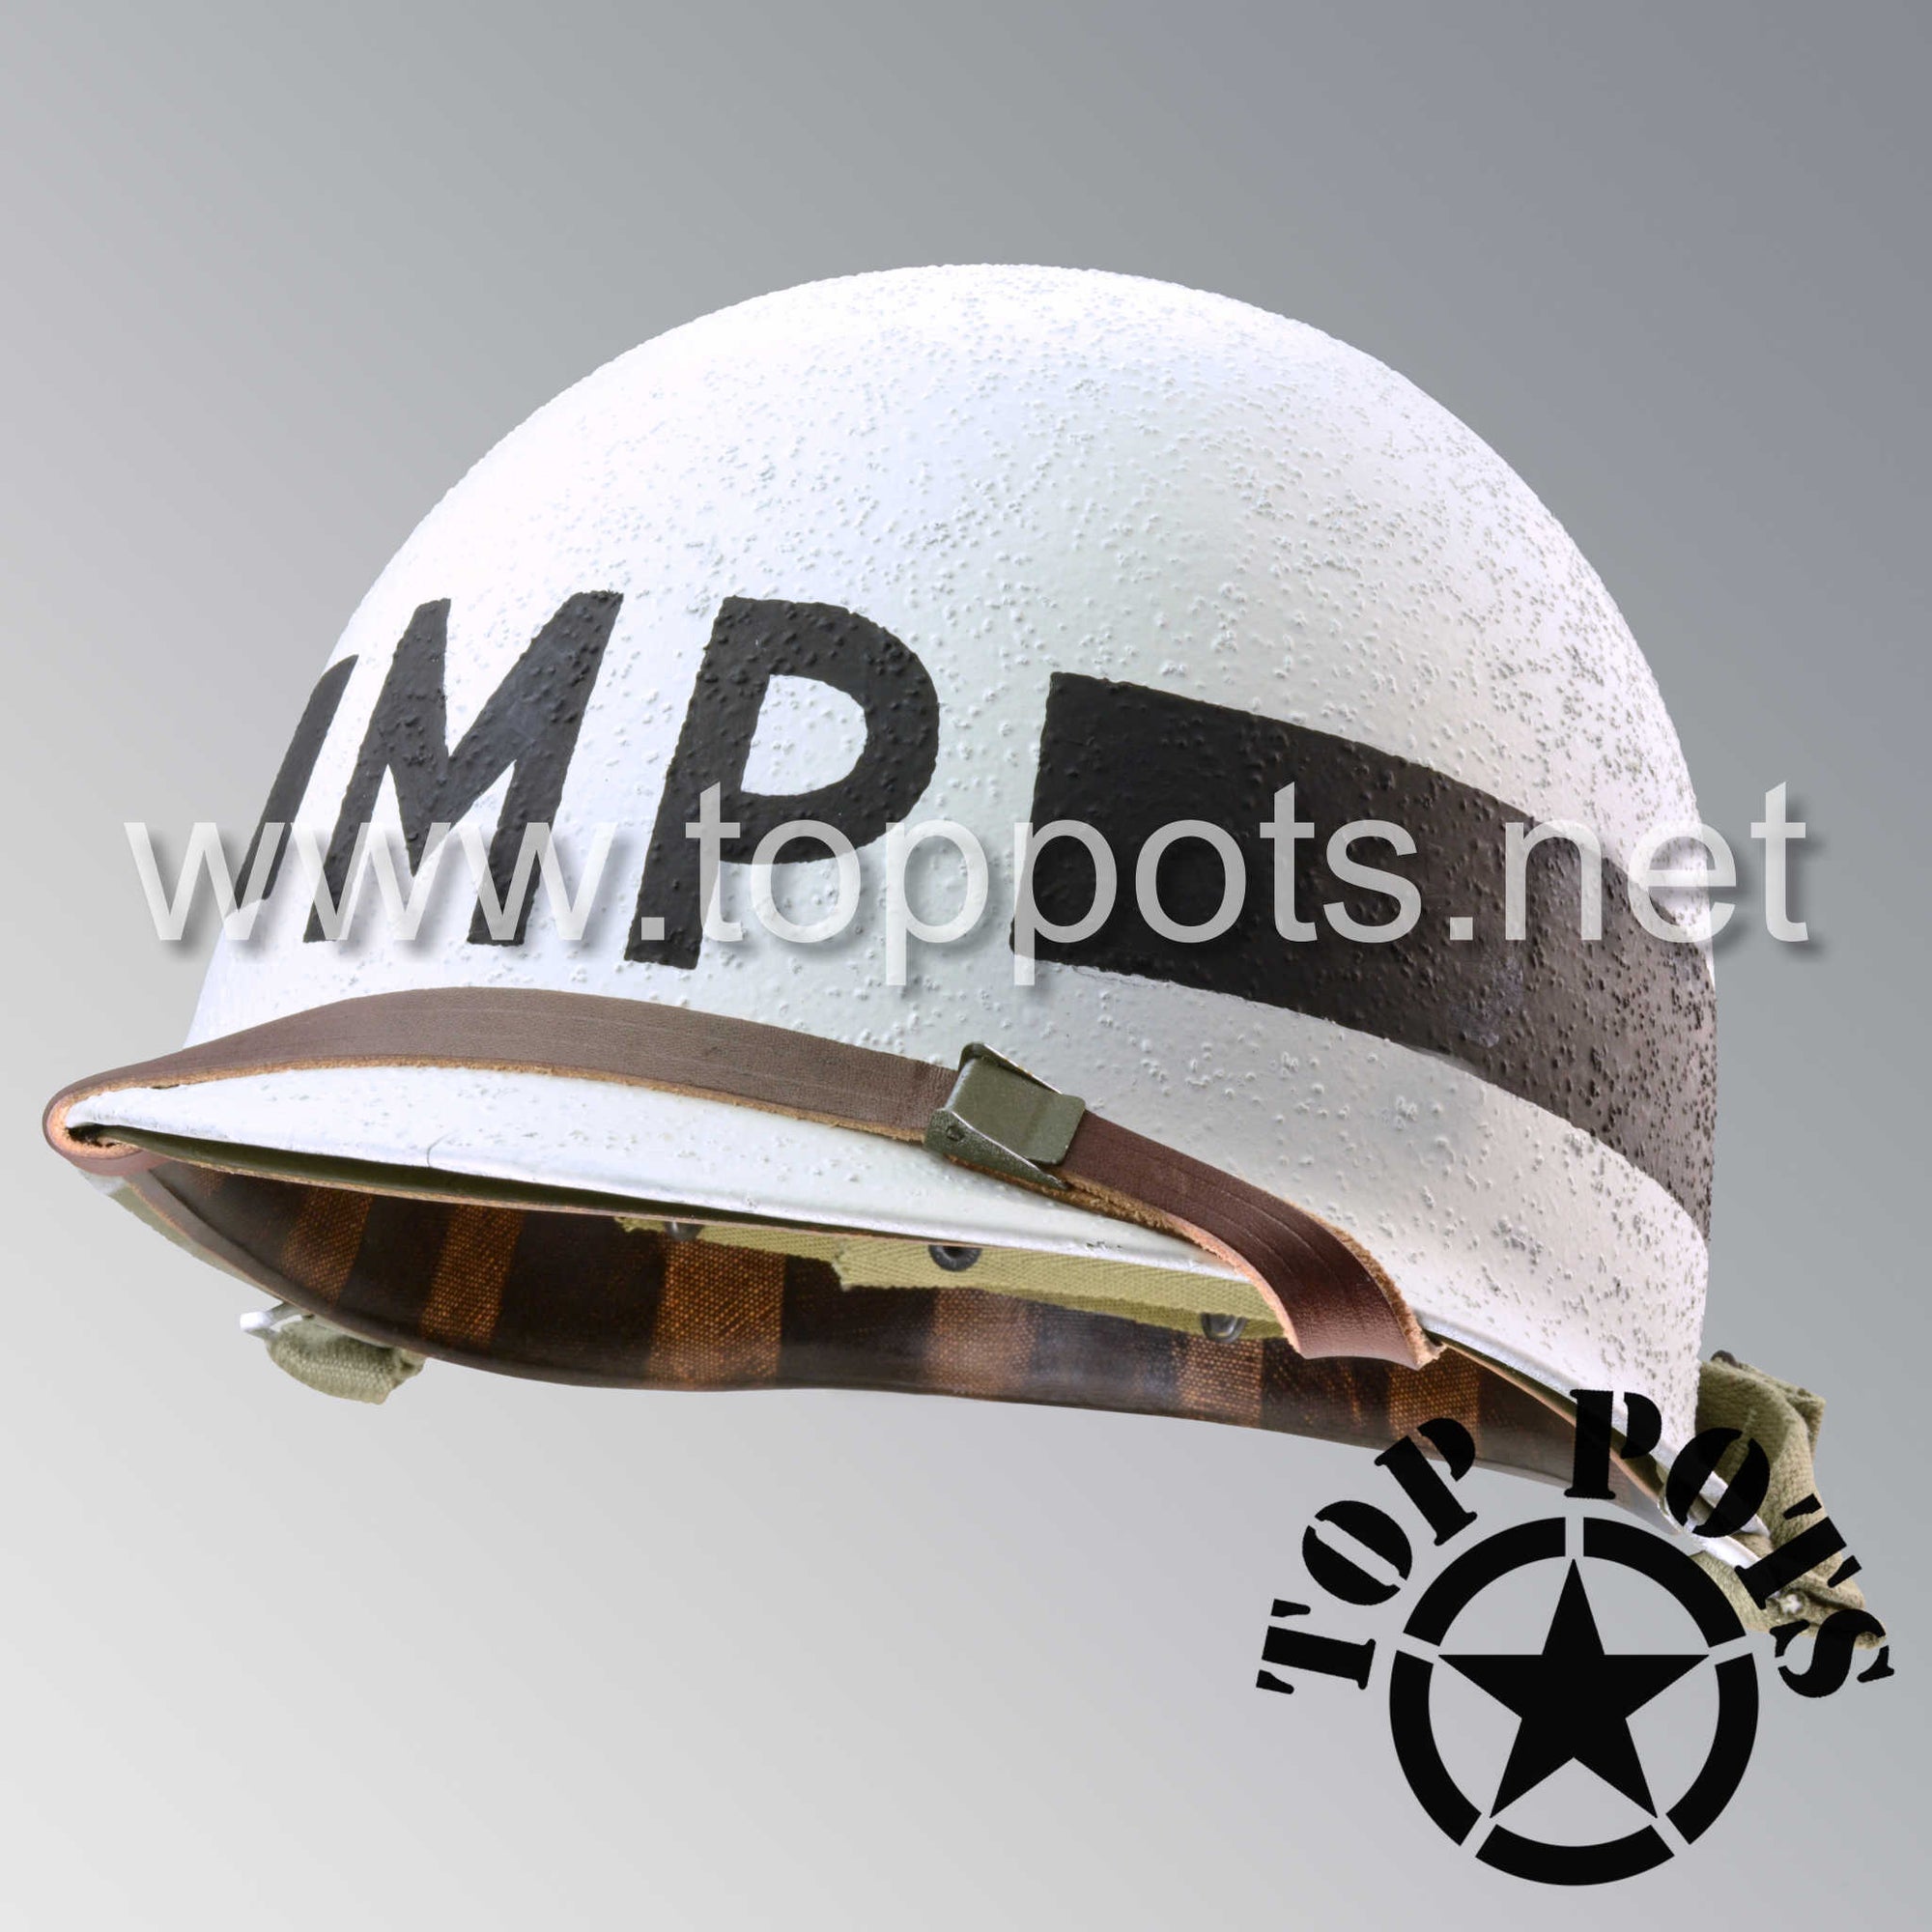 WWII US Army Restored Original M1 Infantry Helmet Swivel Bale Shell and Liner with White MP Military Police Emblem